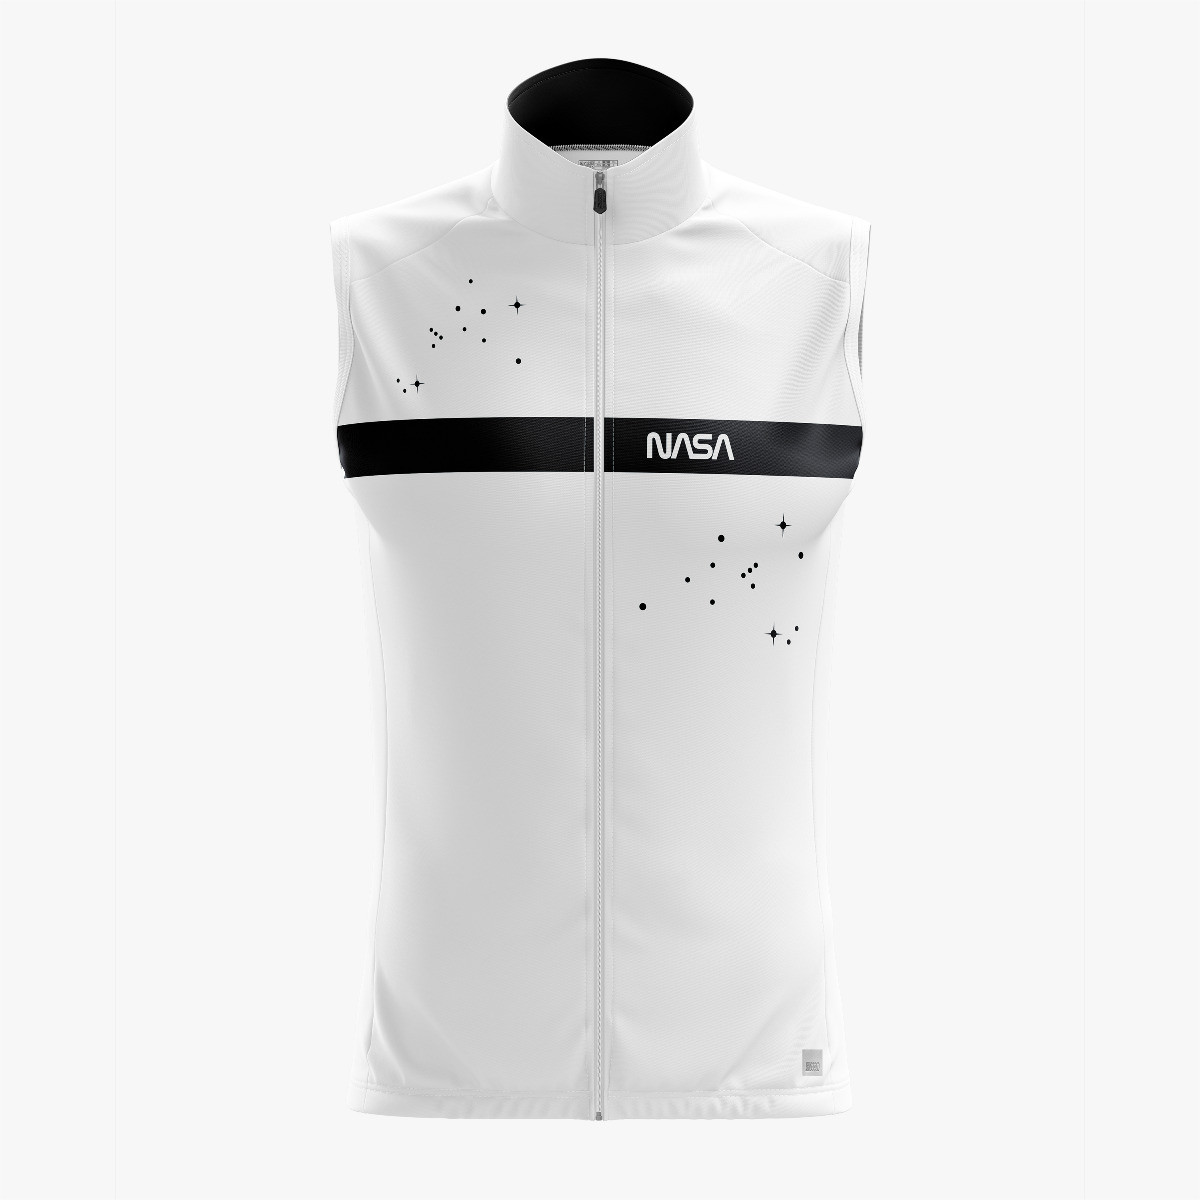 WV11001 cycling vest space agency 21
